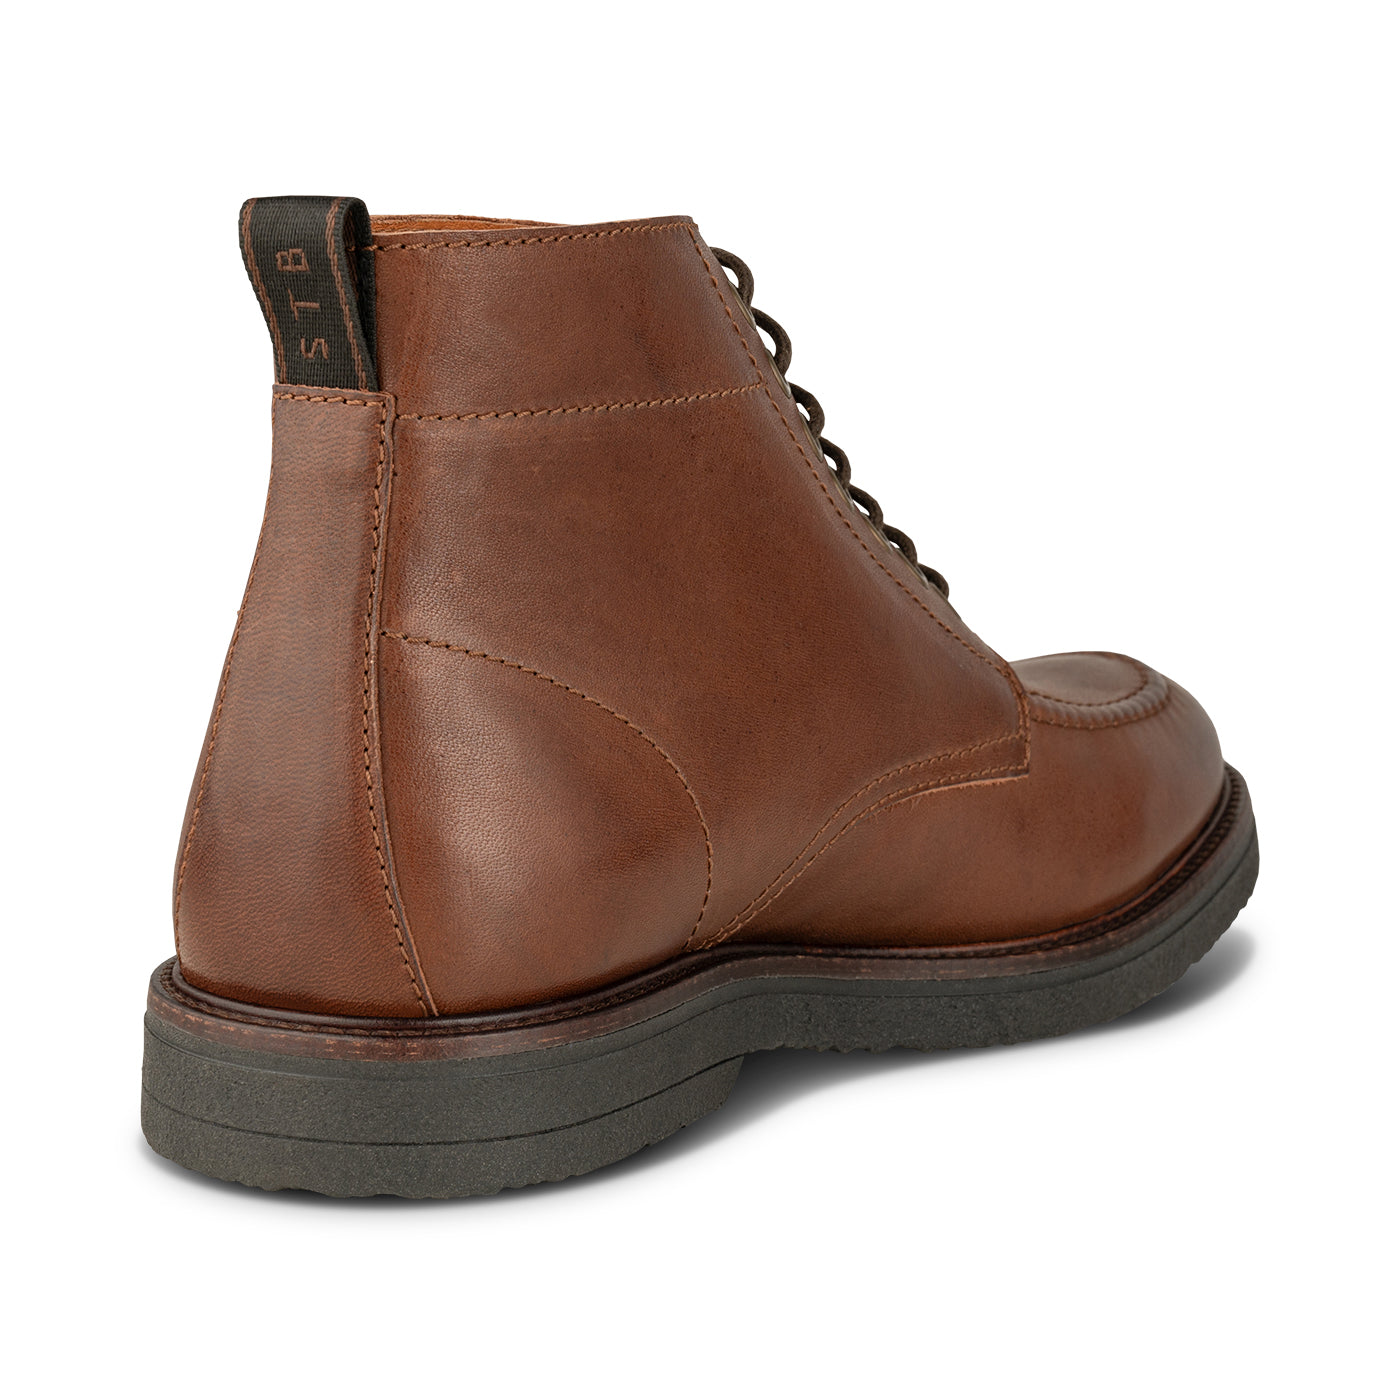 SHOE THE BEAR MENS STB-Kip Apron Water Repellent Boots 067 Brown